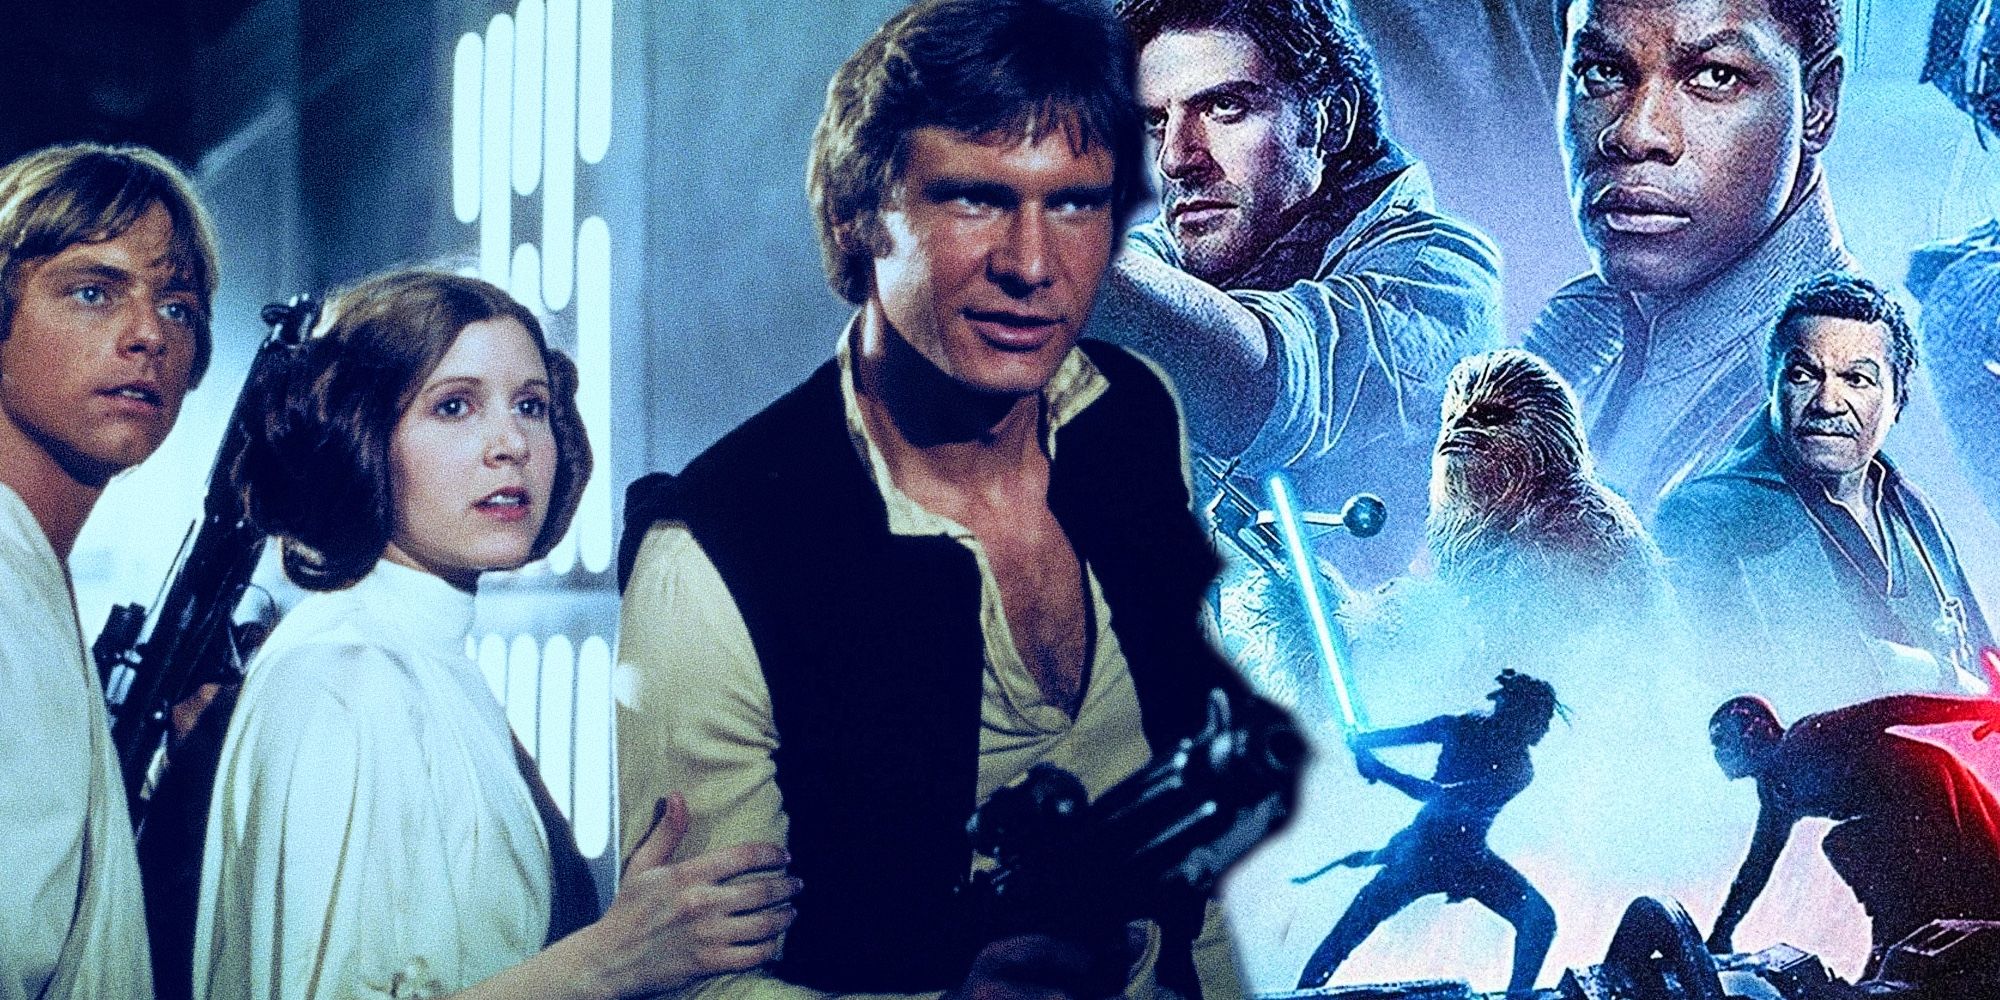 the star wars sequel's biggest failure was wasting their original characters han solo luke Leia skywalker